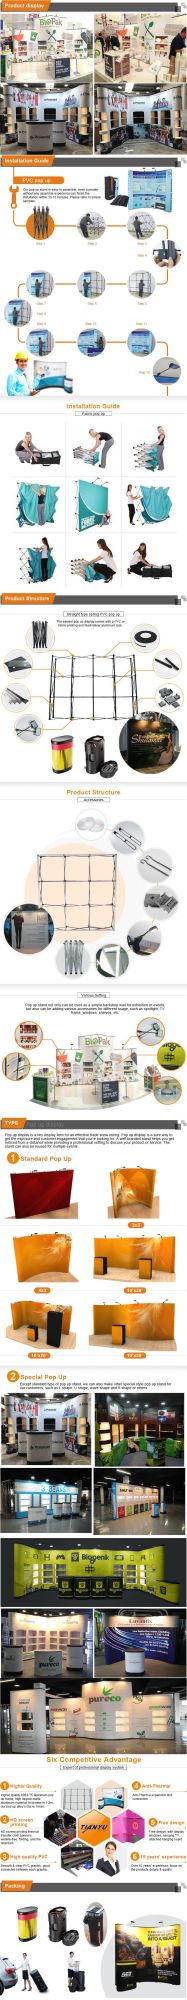 Exhibition Display Aluminum Folding Popular Promotional Backdrop Display Pop up Stand